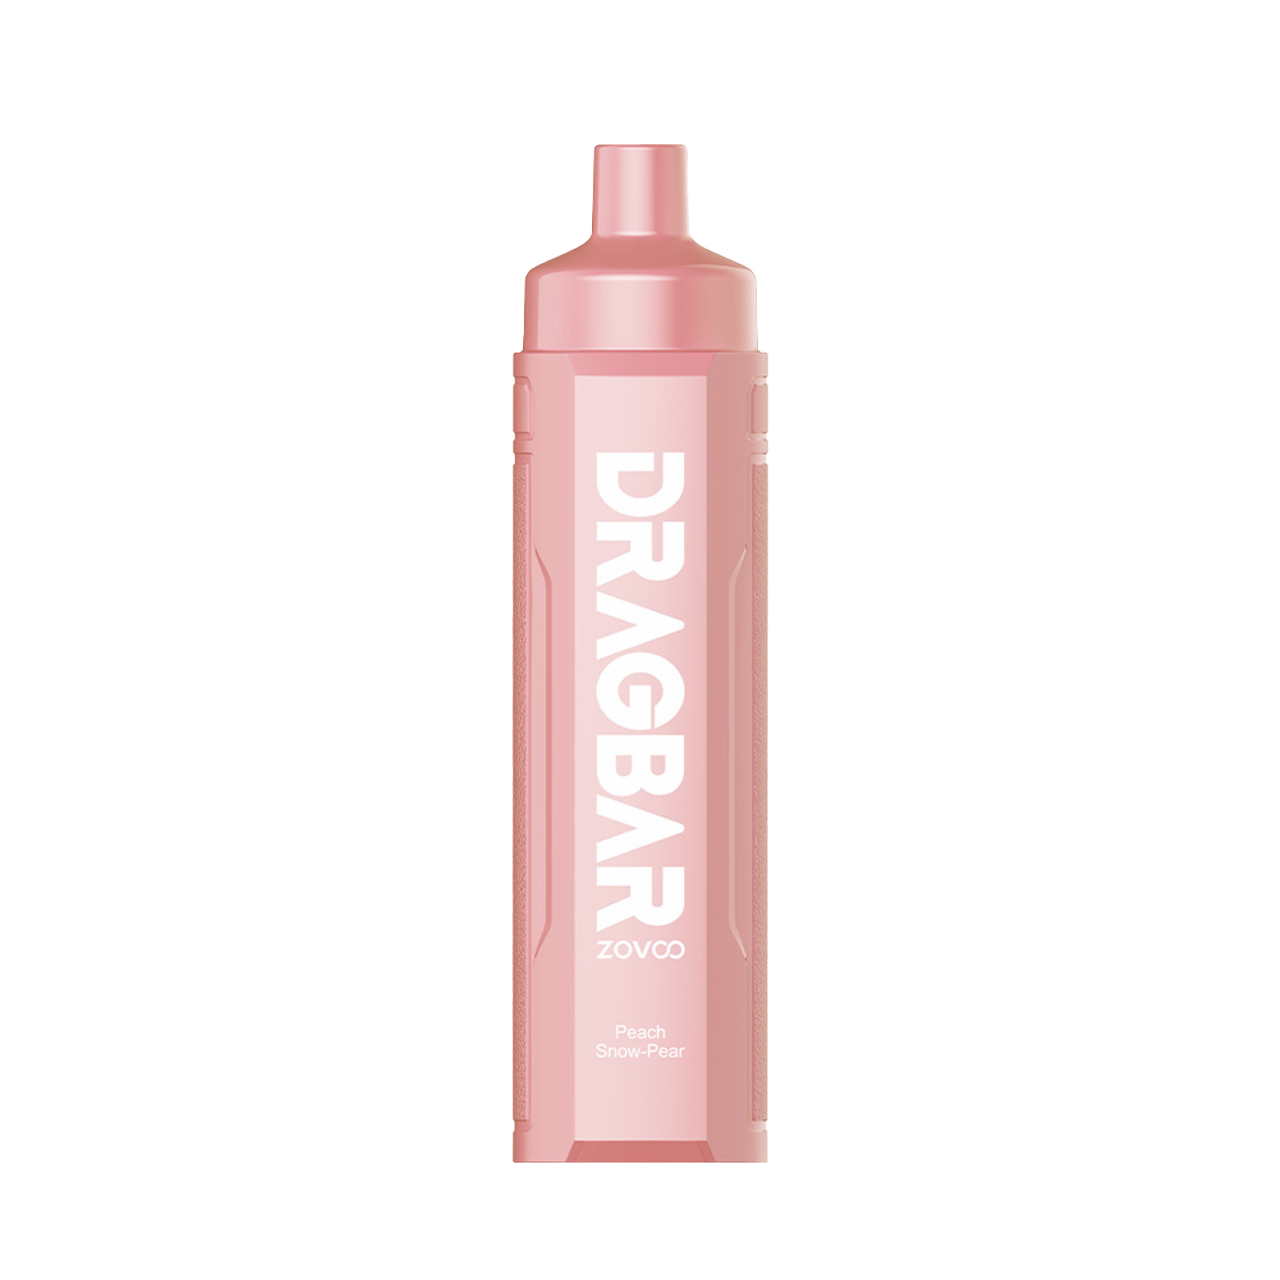 ZoVoo DragBar R6000 Disposable Rechargeable Vape - Peach Snow Pear